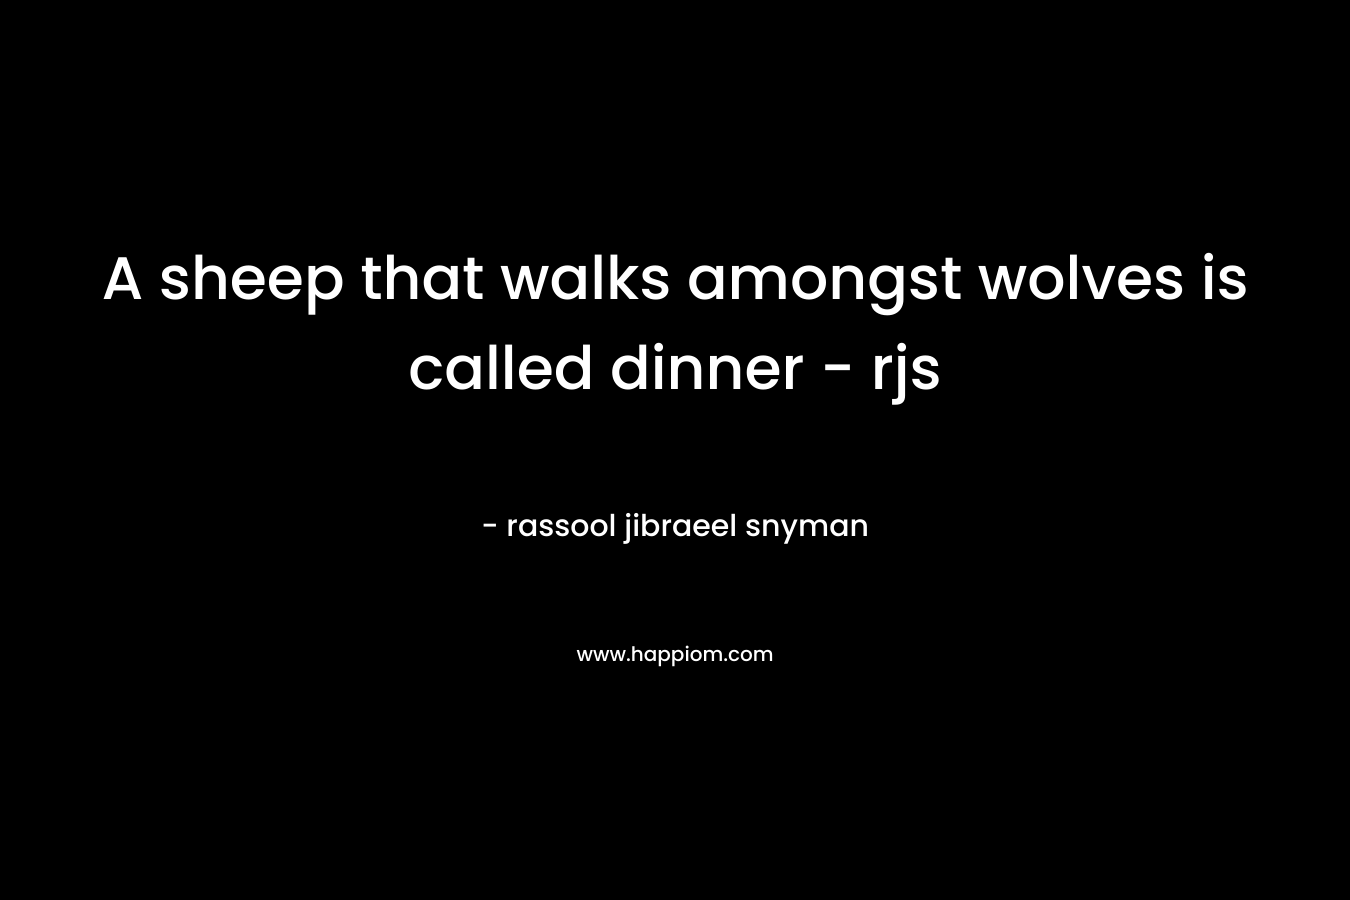 A sheep that walks amongst wolves is called dinner - rjs